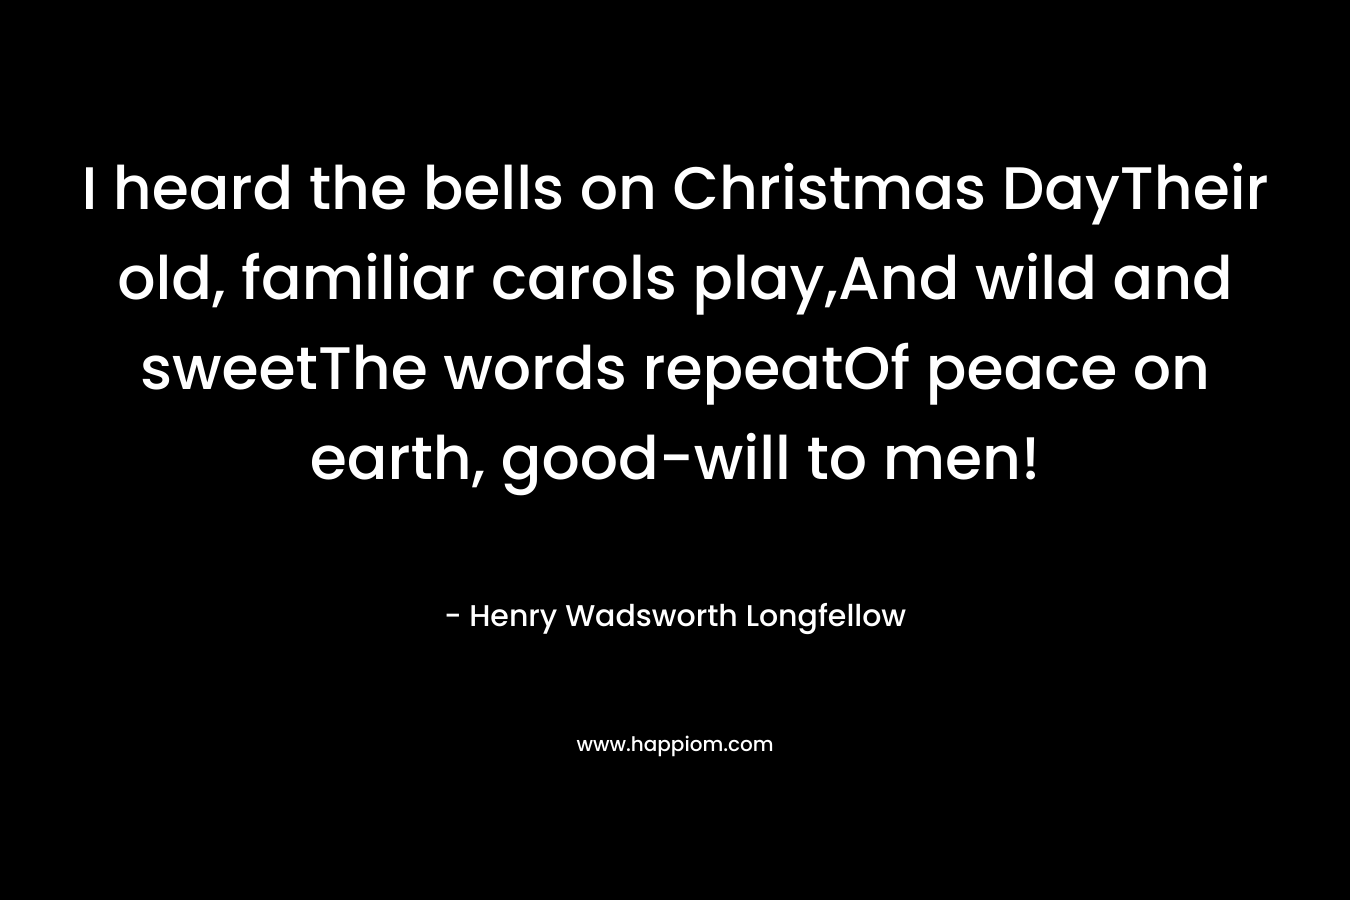 I heard the bells on Christmas DayTheir old, familiar carols play,And wild and sweetThe words repeatOf peace on earth, good-will to men! – Henry Wadsworth Longfellow